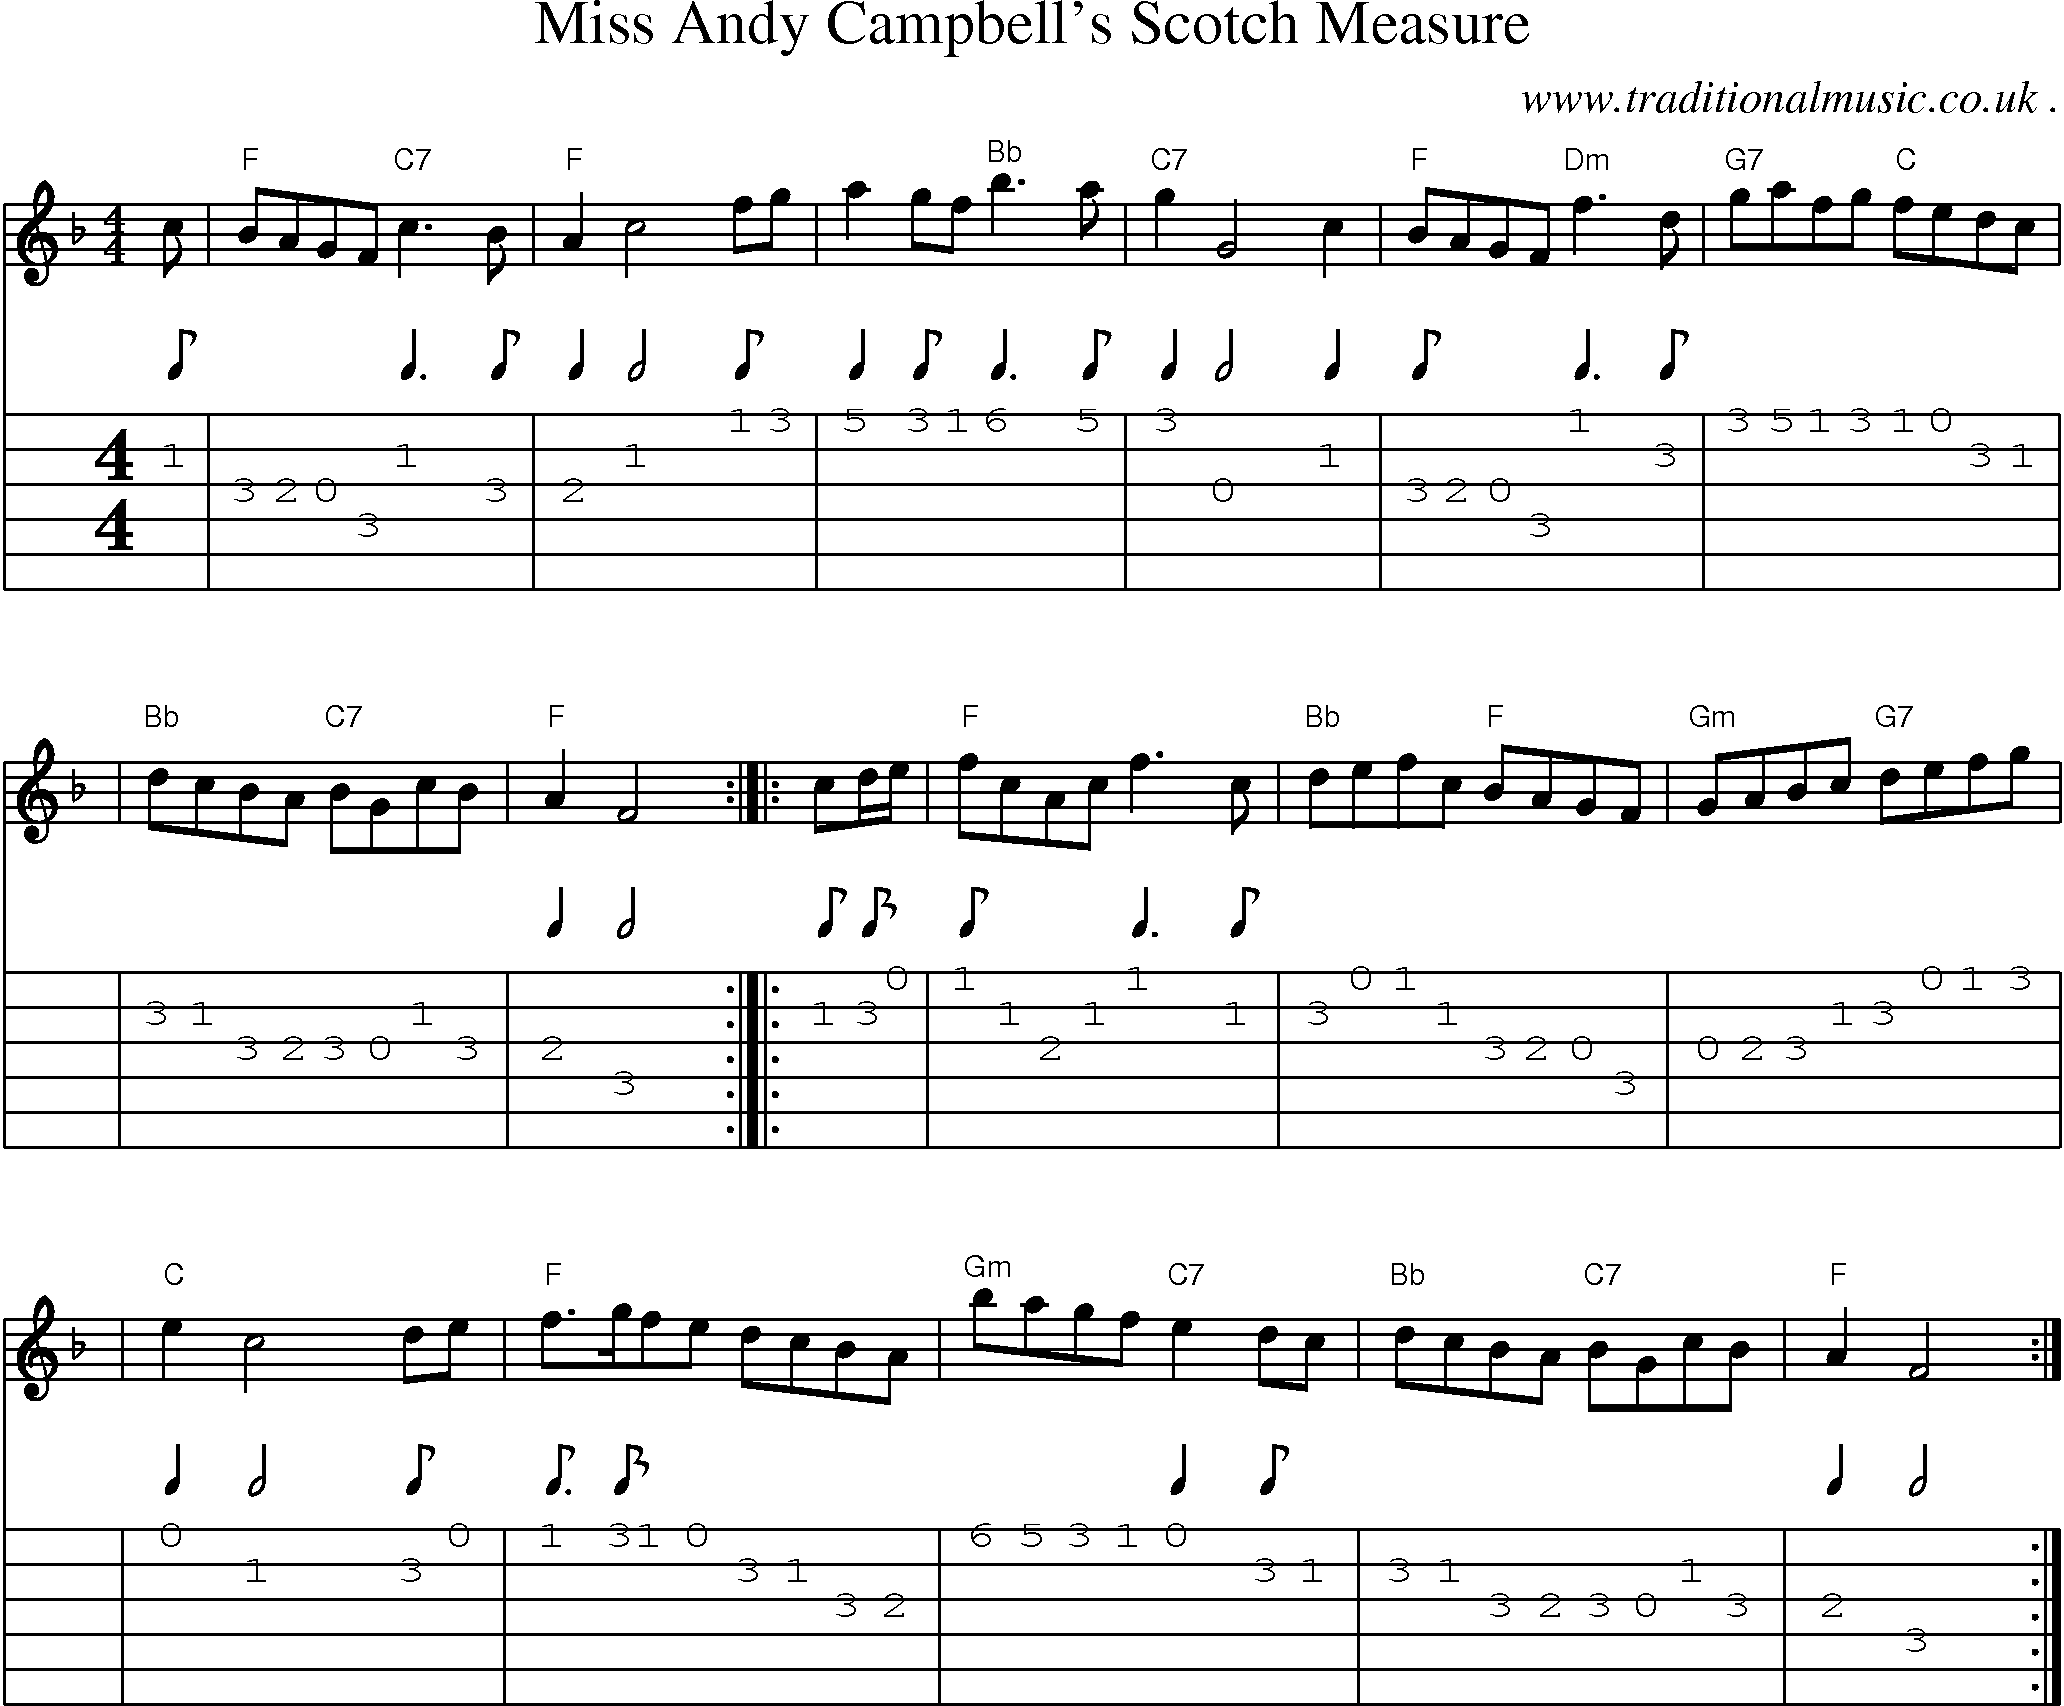 Sheet-music  score, Chords and Guitar Tabs for Miss Andy Campbells Scotch Measure